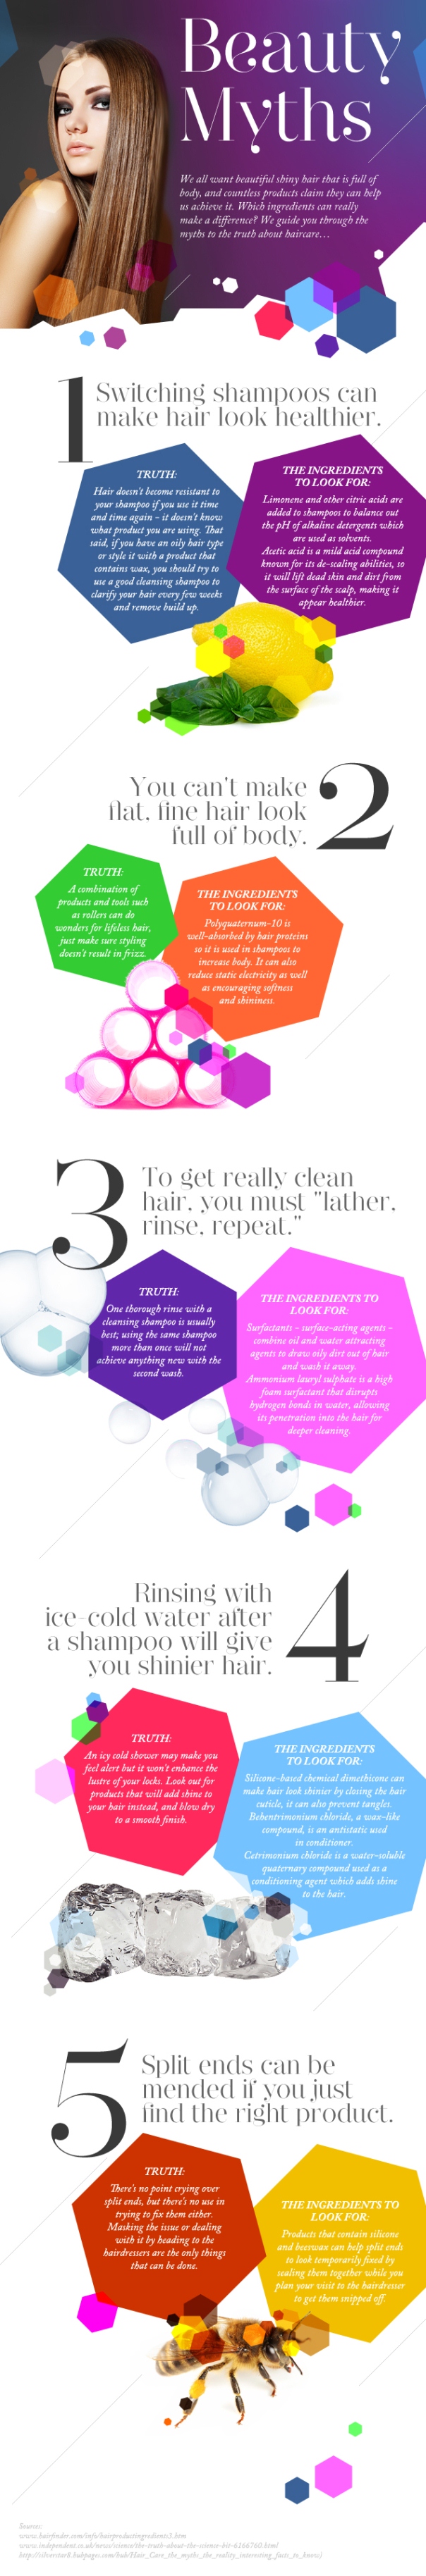 Beauty Myths (Infographic)